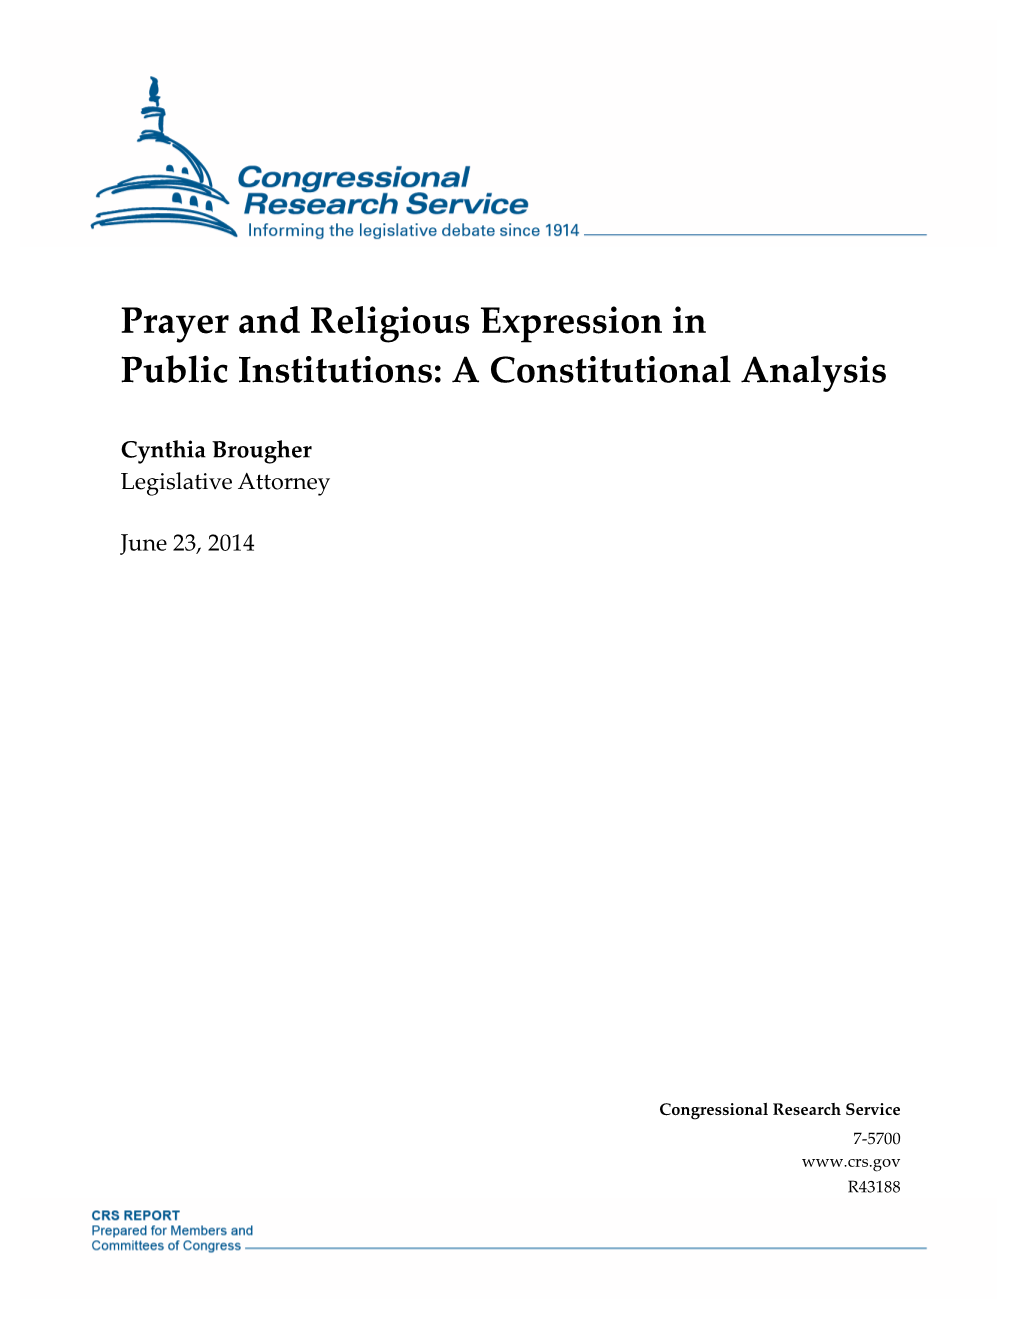 Prayer and Religious Expression in Public Institutions: a Constitutional Analysis